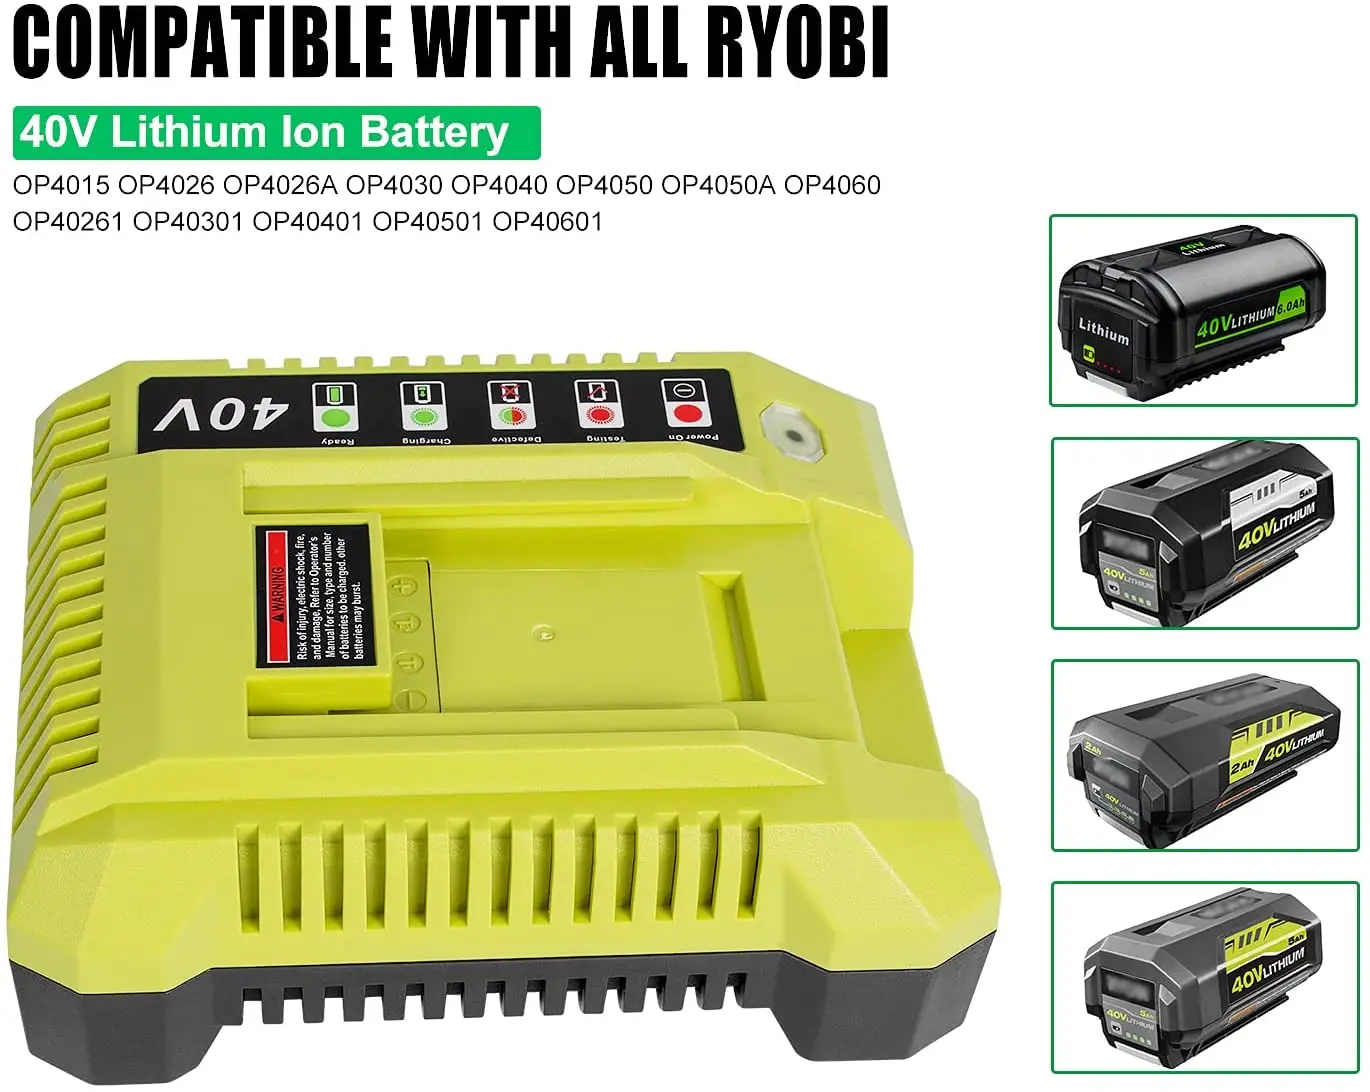 

40V Charger for Ryobi OP401 Lithium-Ion Battery Charger For OP4050A OP4015 OP4026 OP4030 OP4040 OP4050 OP400A OP403A ZROP401